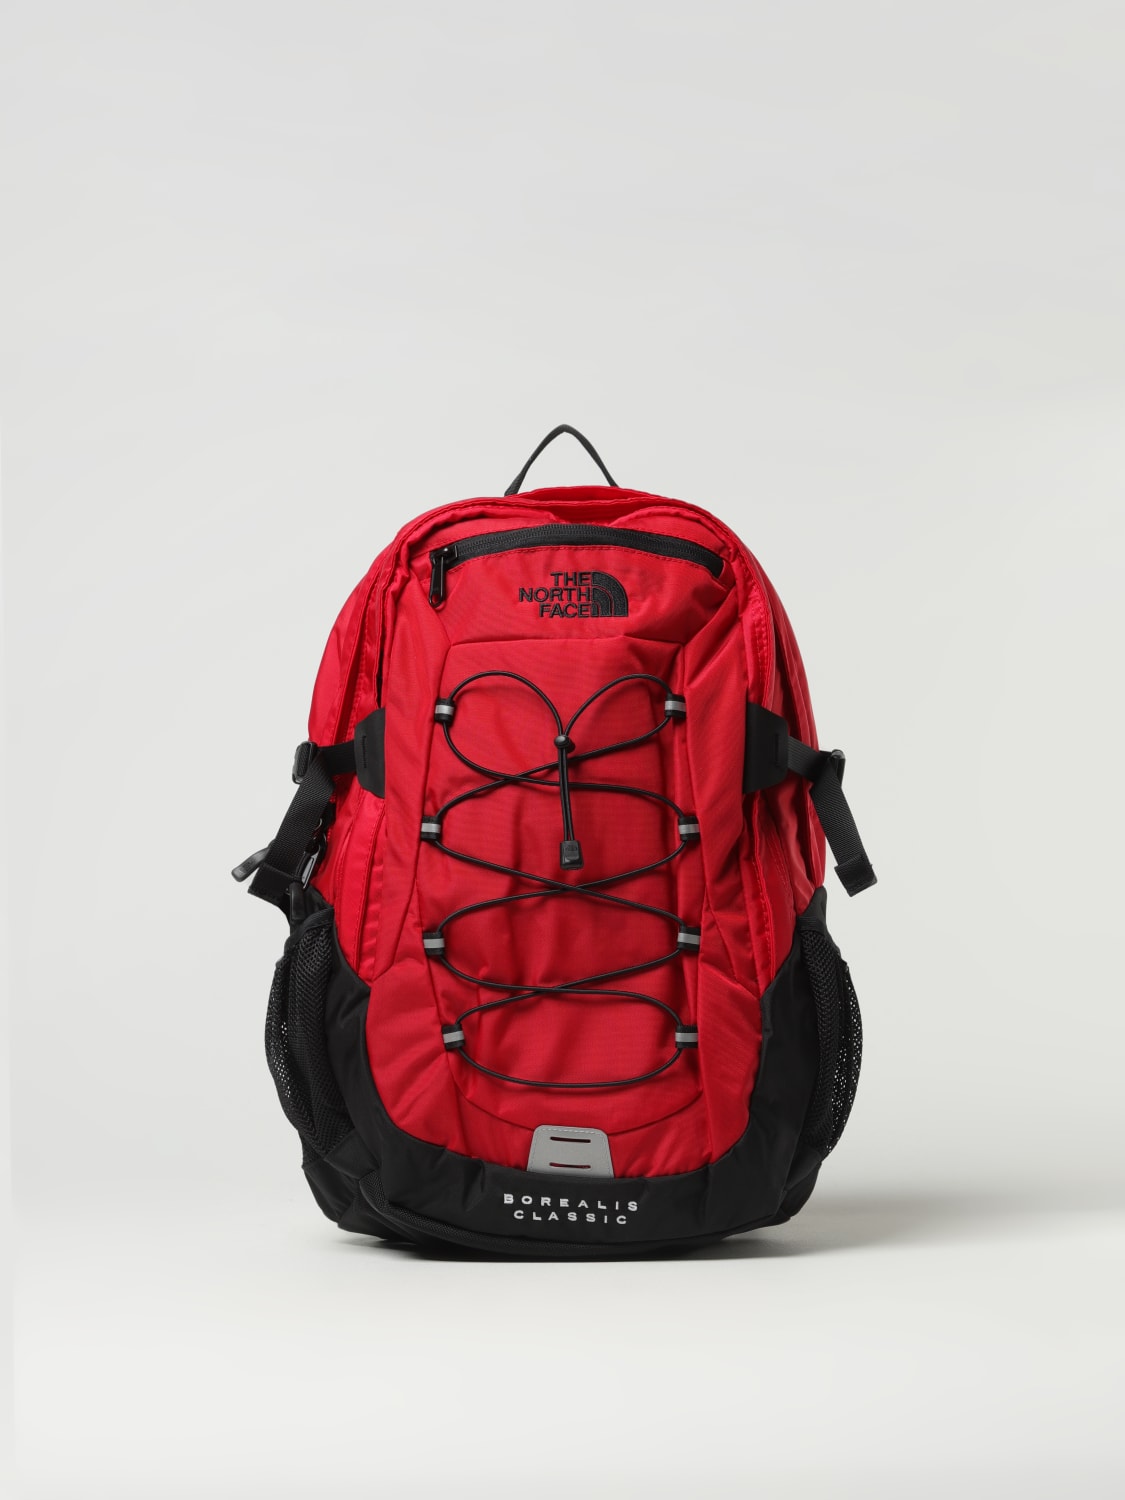 THE NORTH FACE：バックパック メンズ - レッド | GIGLIO.COM ...